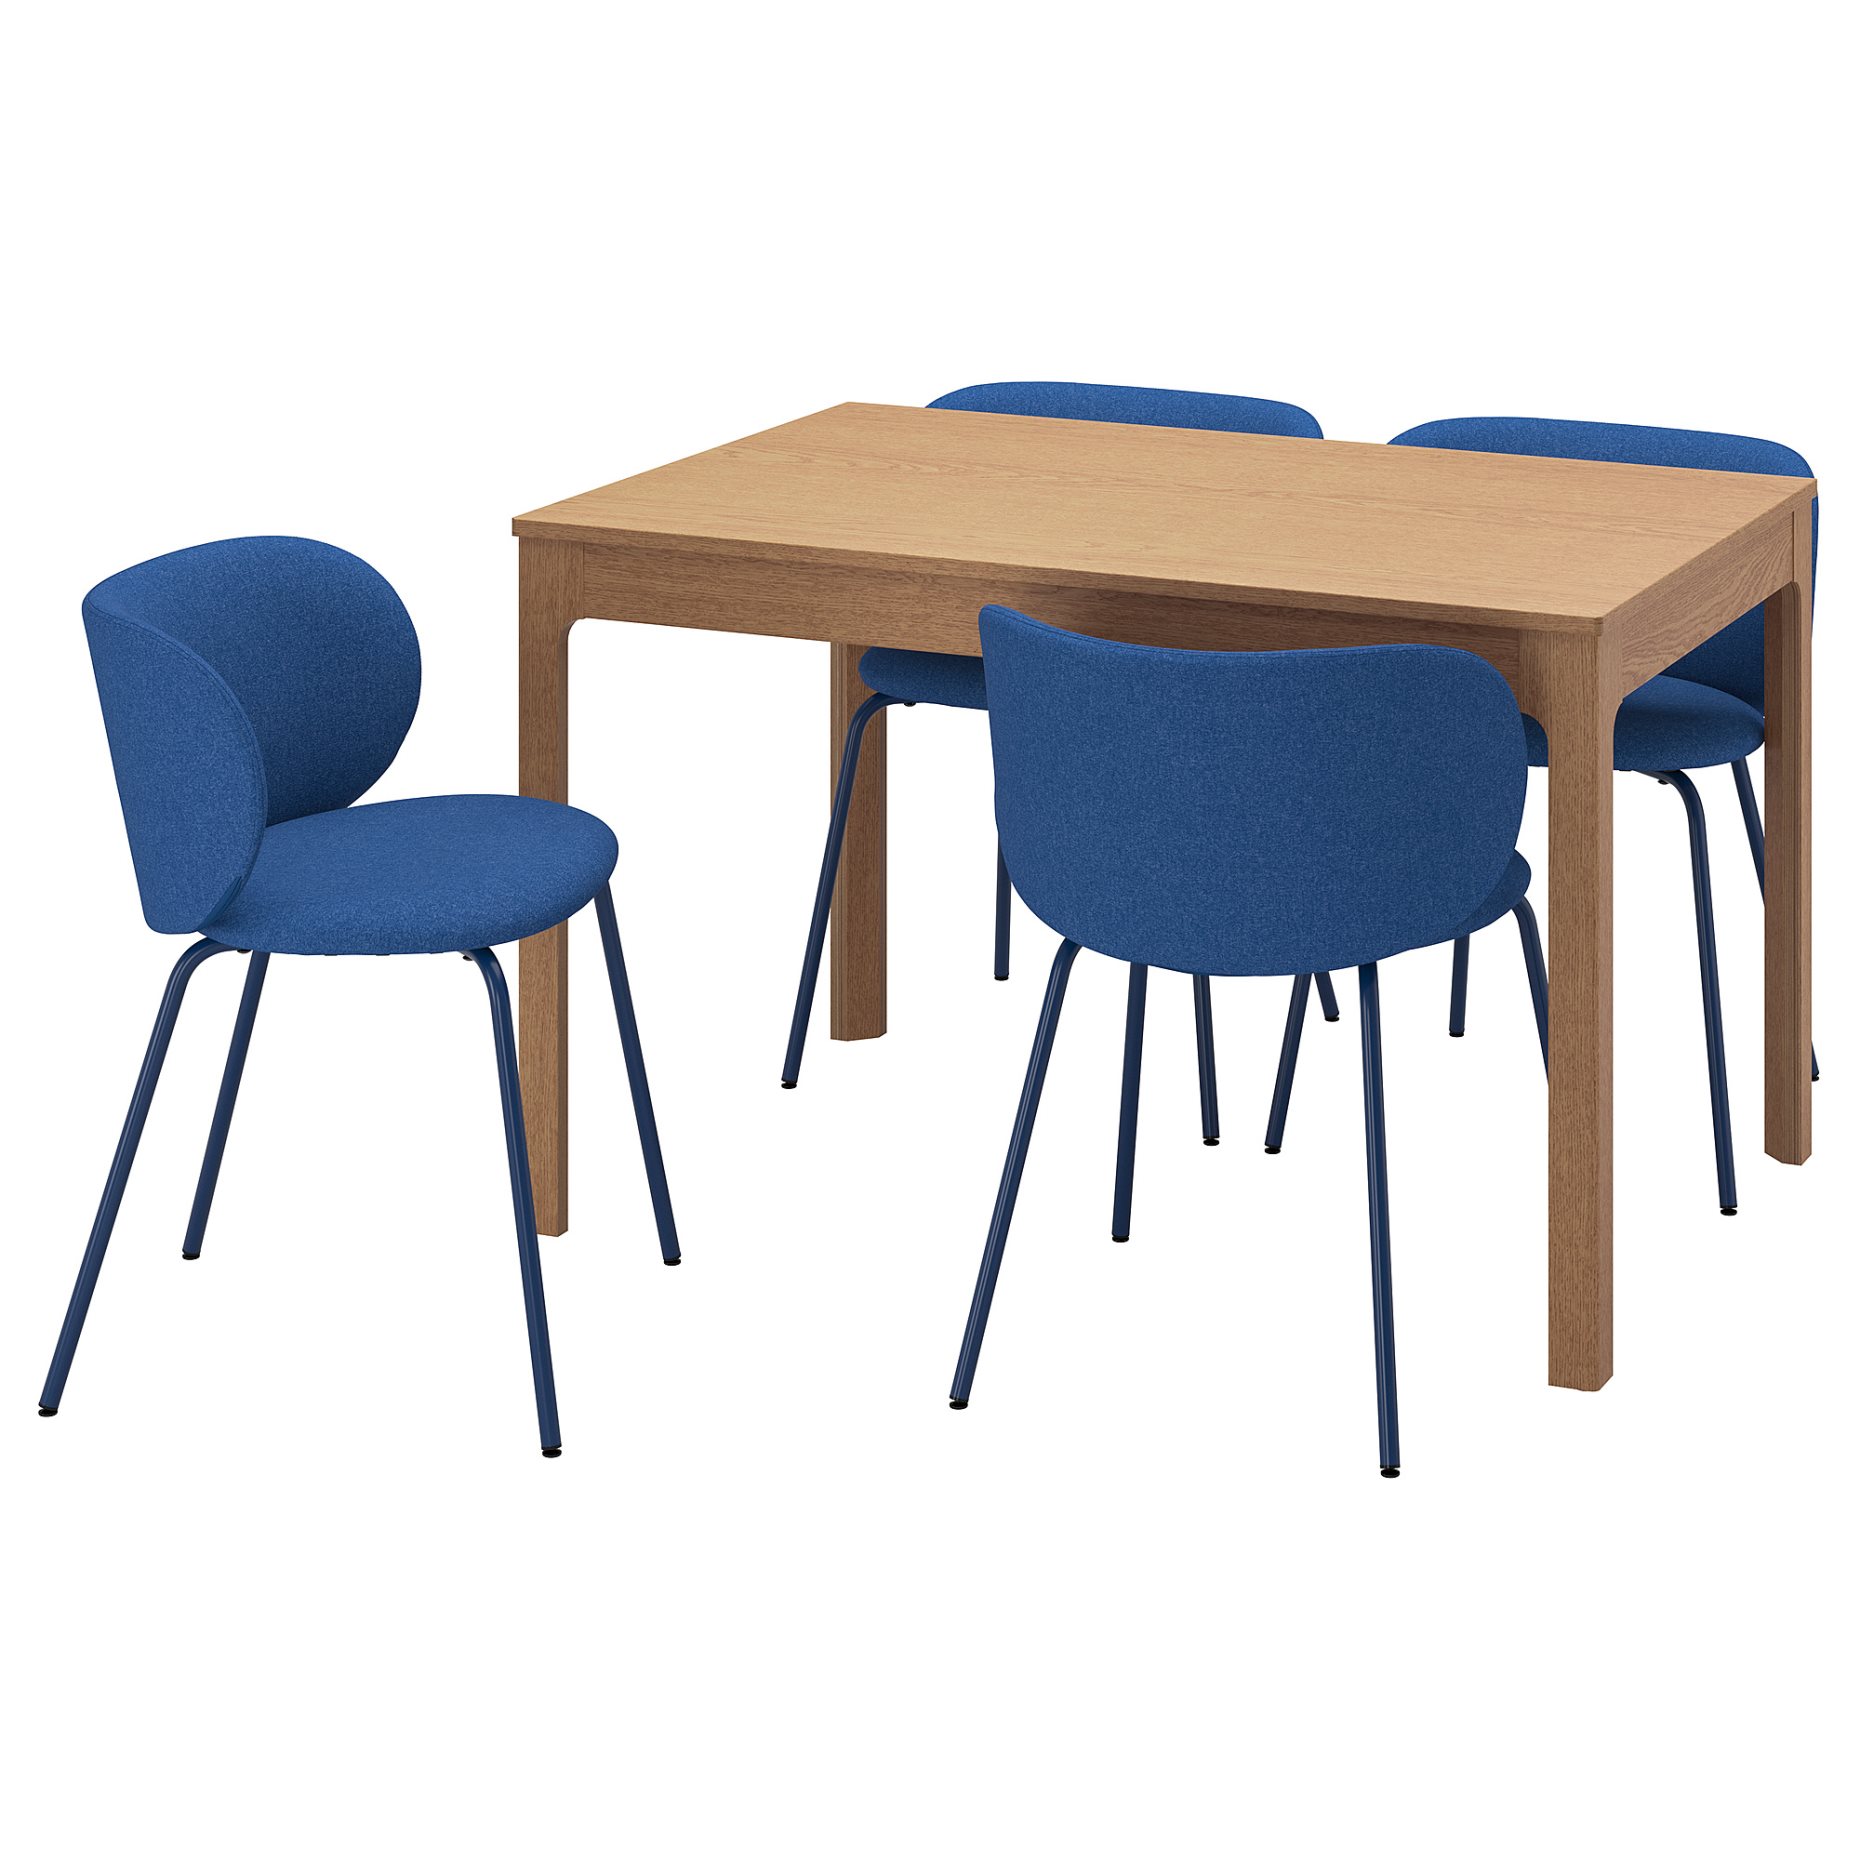 EKEDALEN/KRYLBO, table and 4 chairs, 120/180 cm, 895.363.43